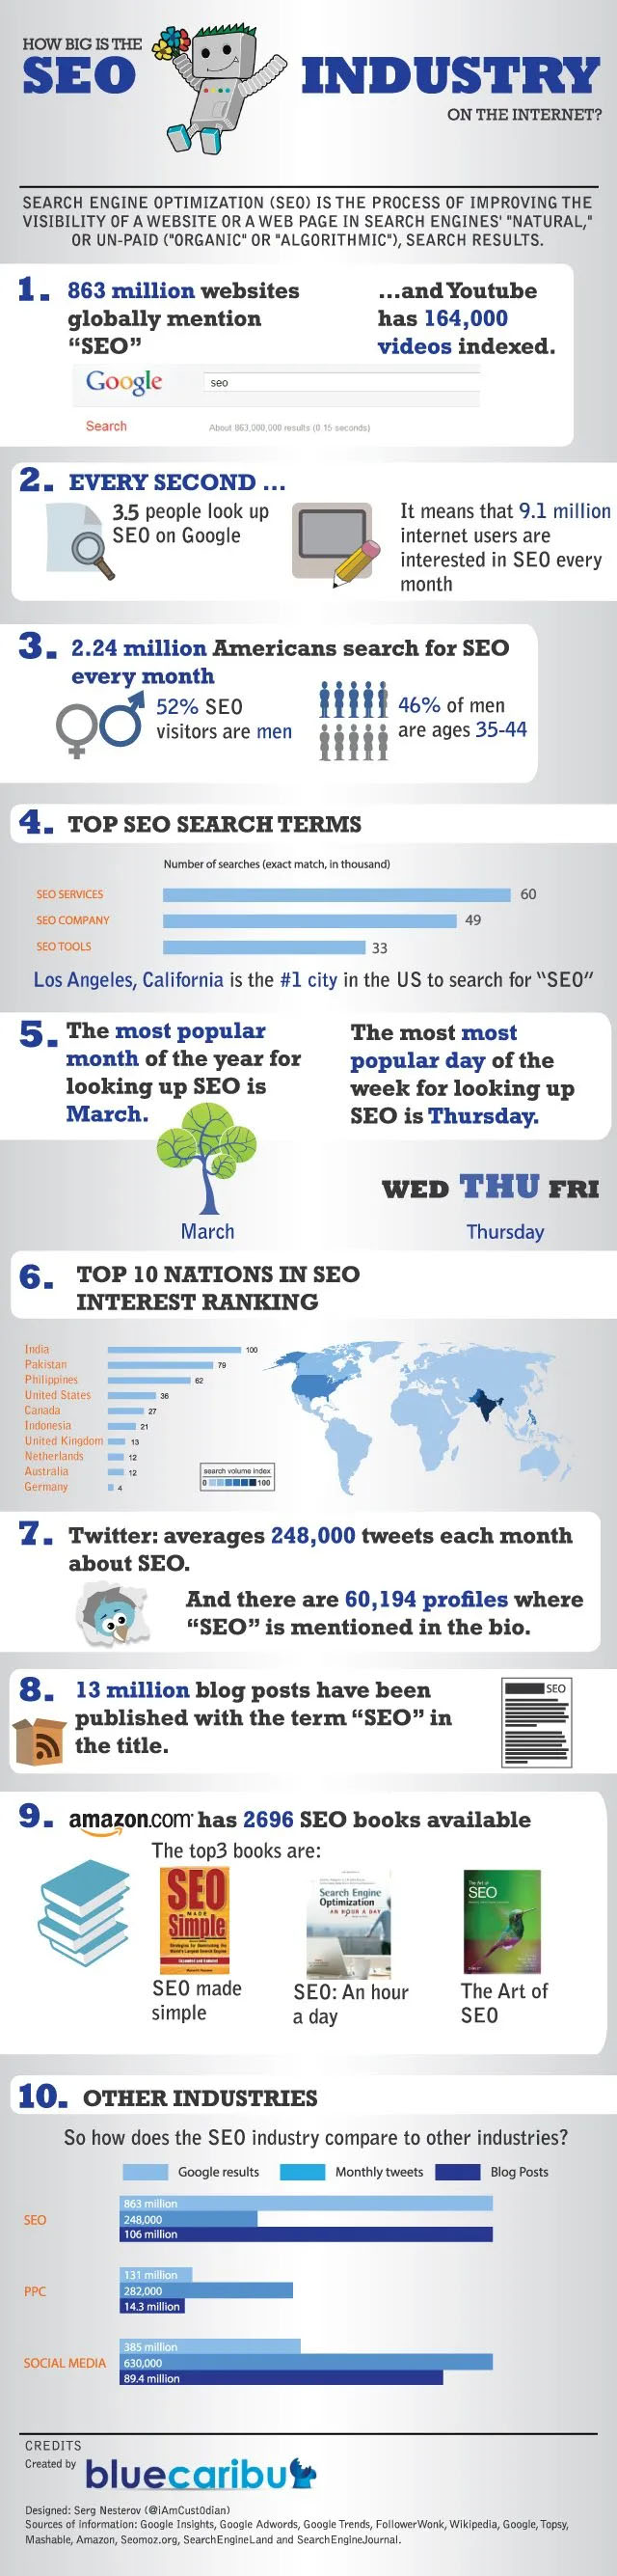 How Big is the SEO Industry?